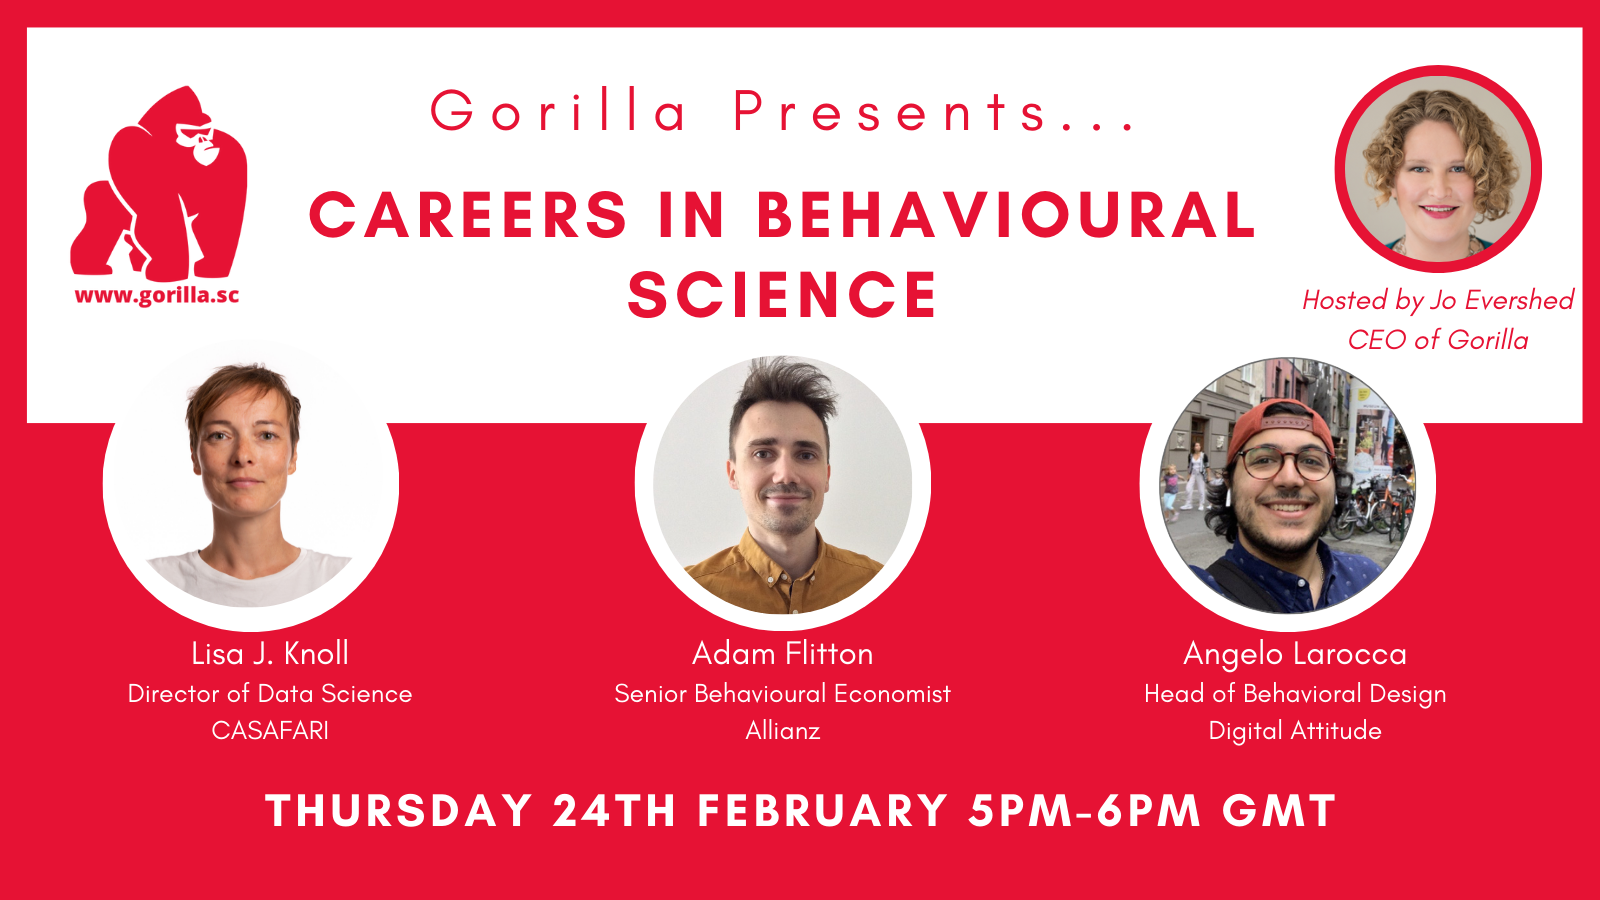 Ad for Gorilla Presents Careers